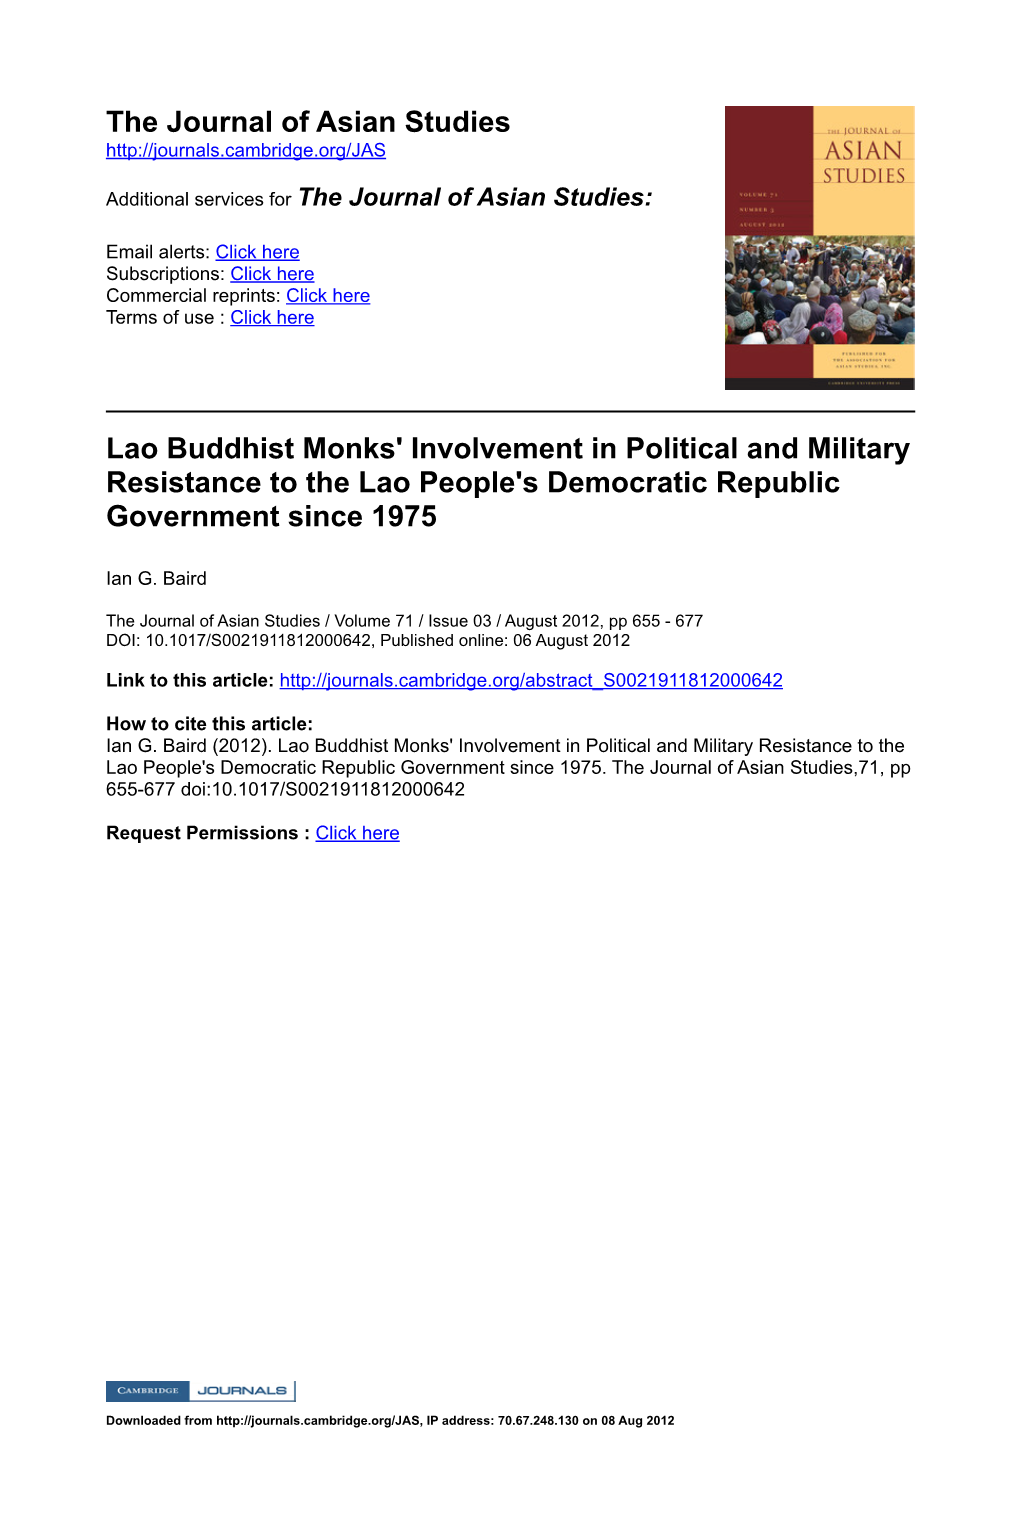 The Journal of Asian Studies Lao Buddhist Monks' Involvement In